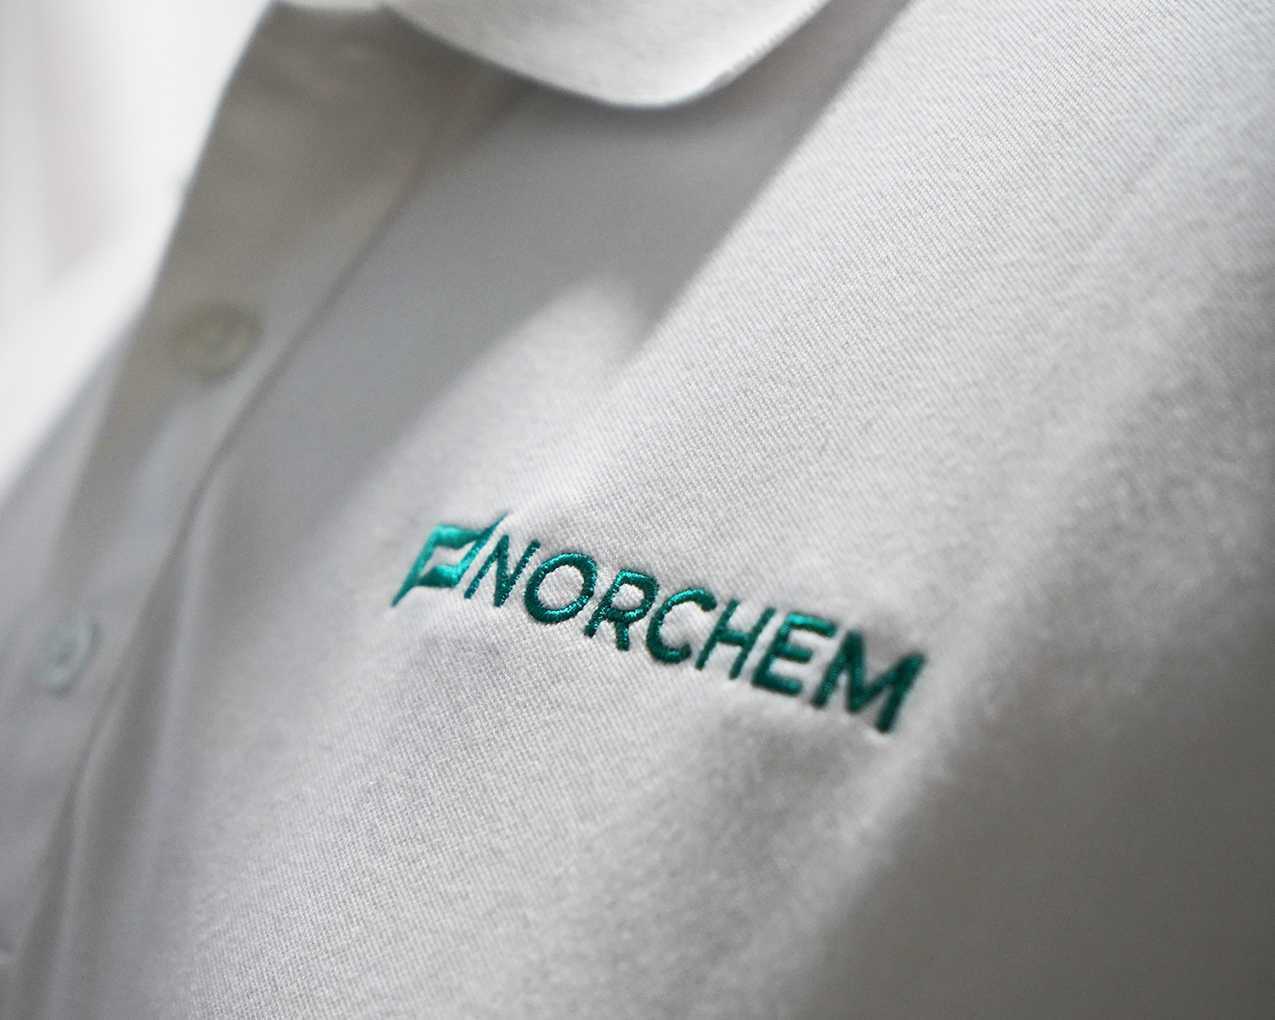 Norchem's 2021 New Look